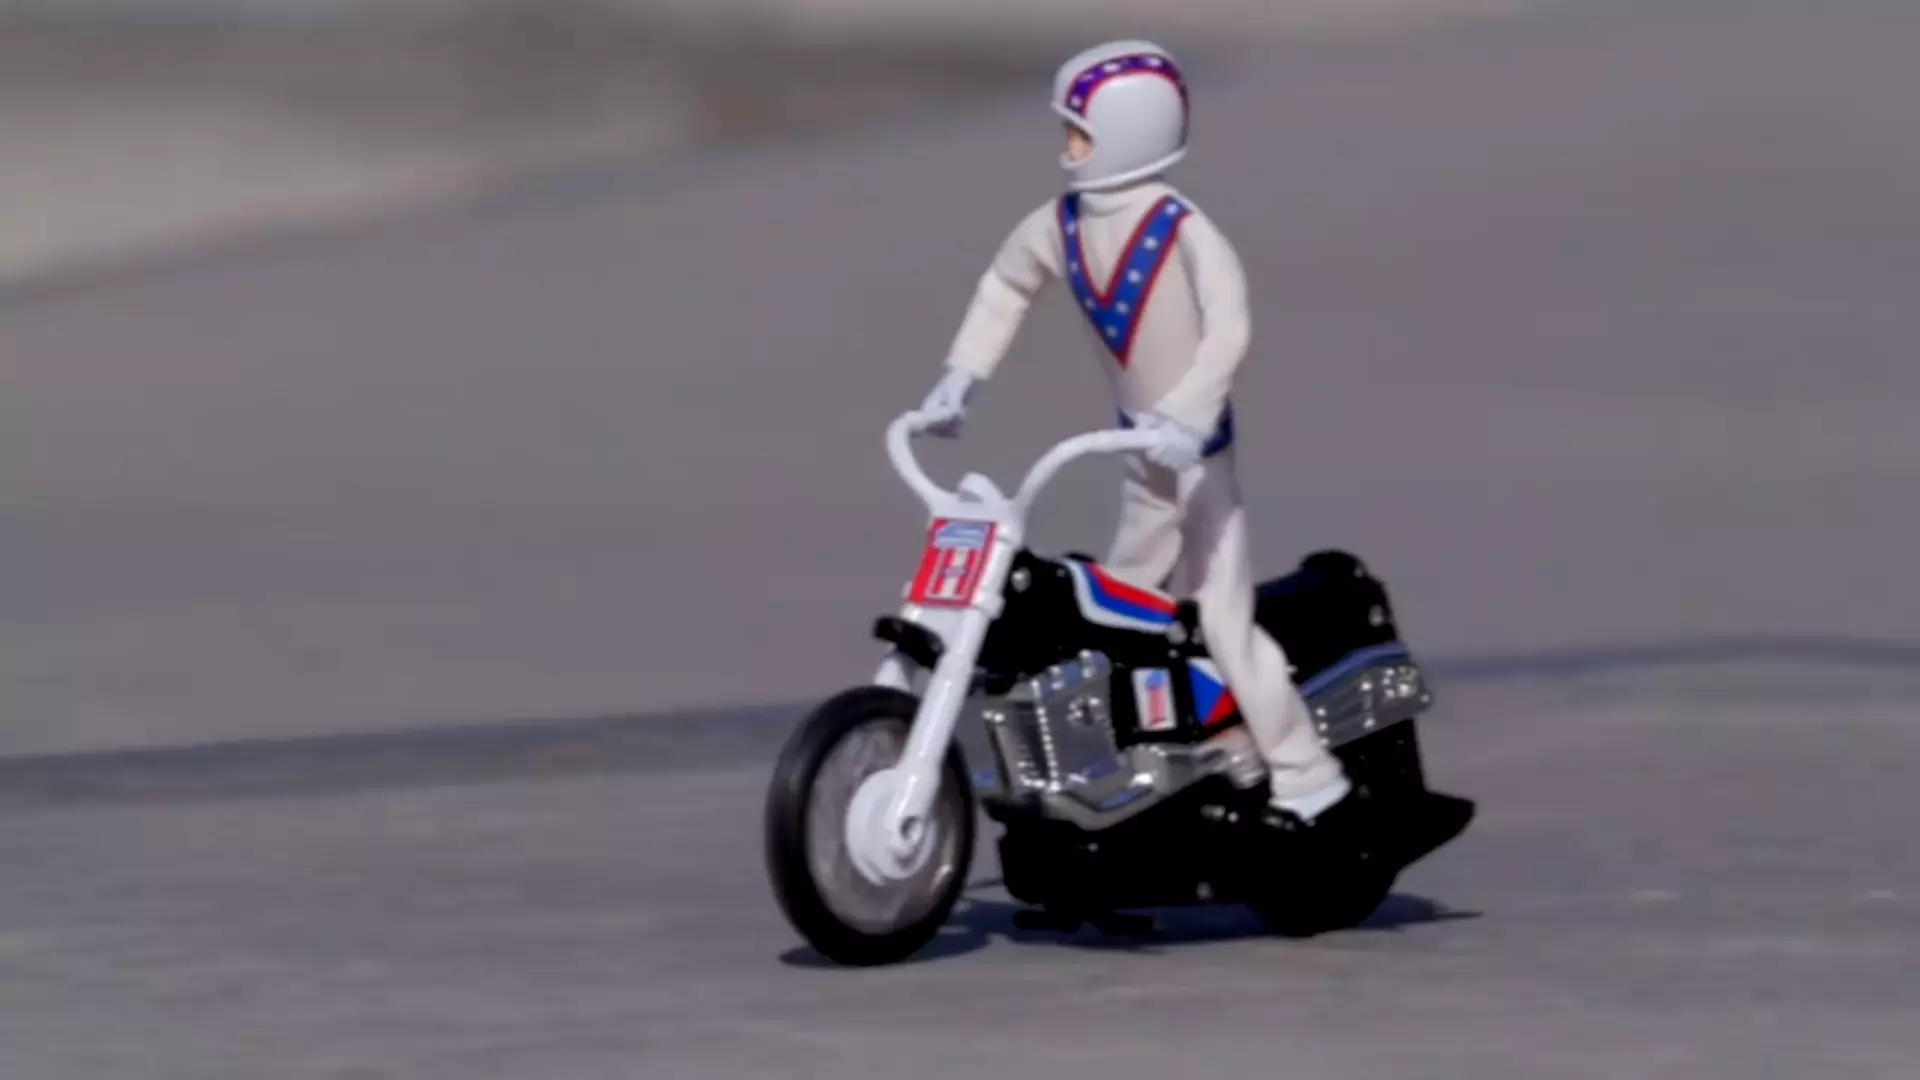 Miracle The Evel Knievel Stunt Cycle Is In Being Made Again